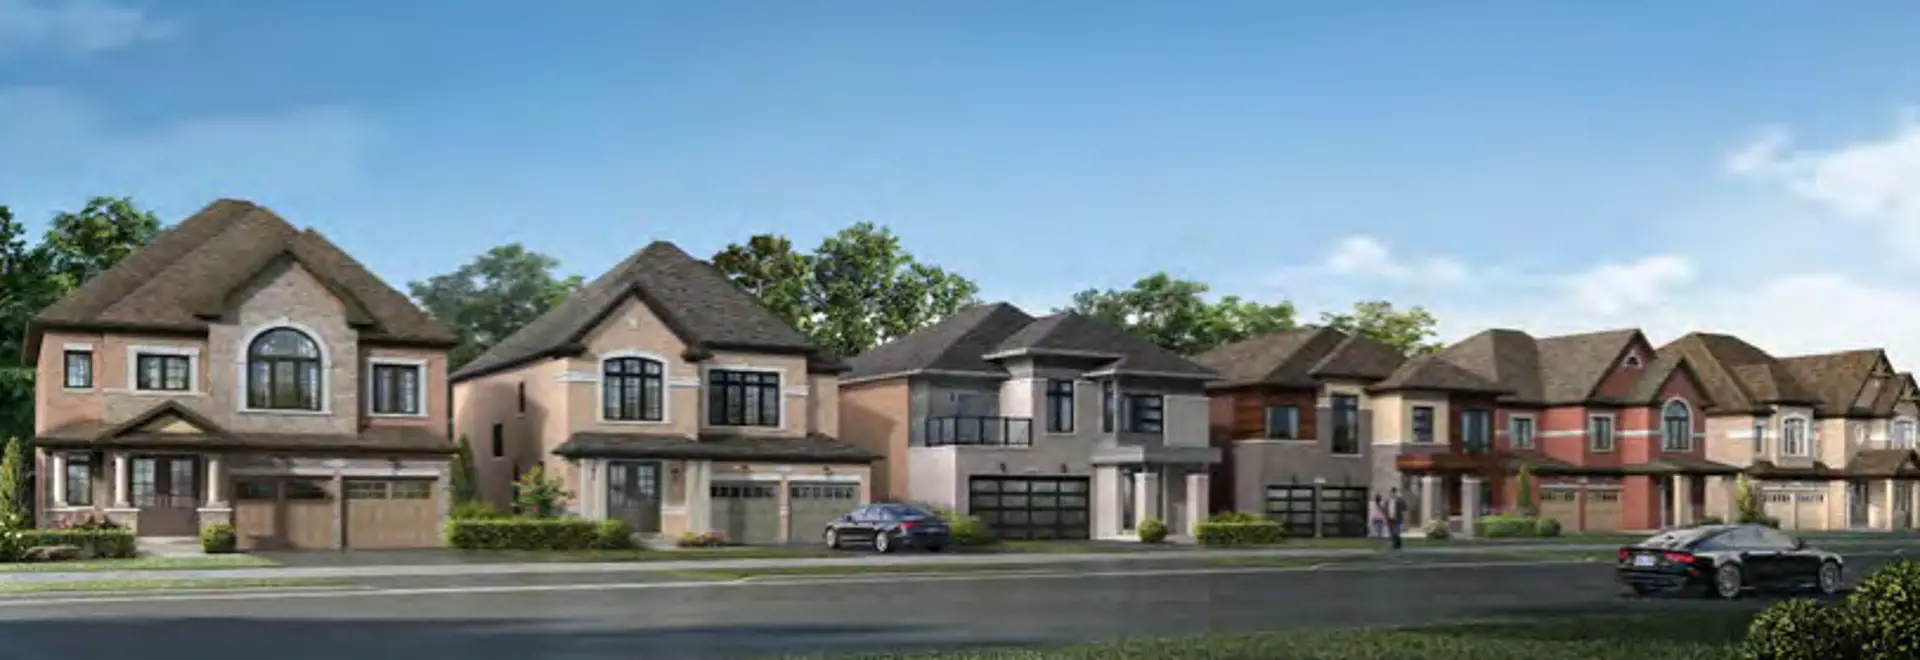 The Bright Side at Mayfield Village located at Mayfield Village Community  | Bramalea Road & Duxbury Road,  Brampton,   ON image